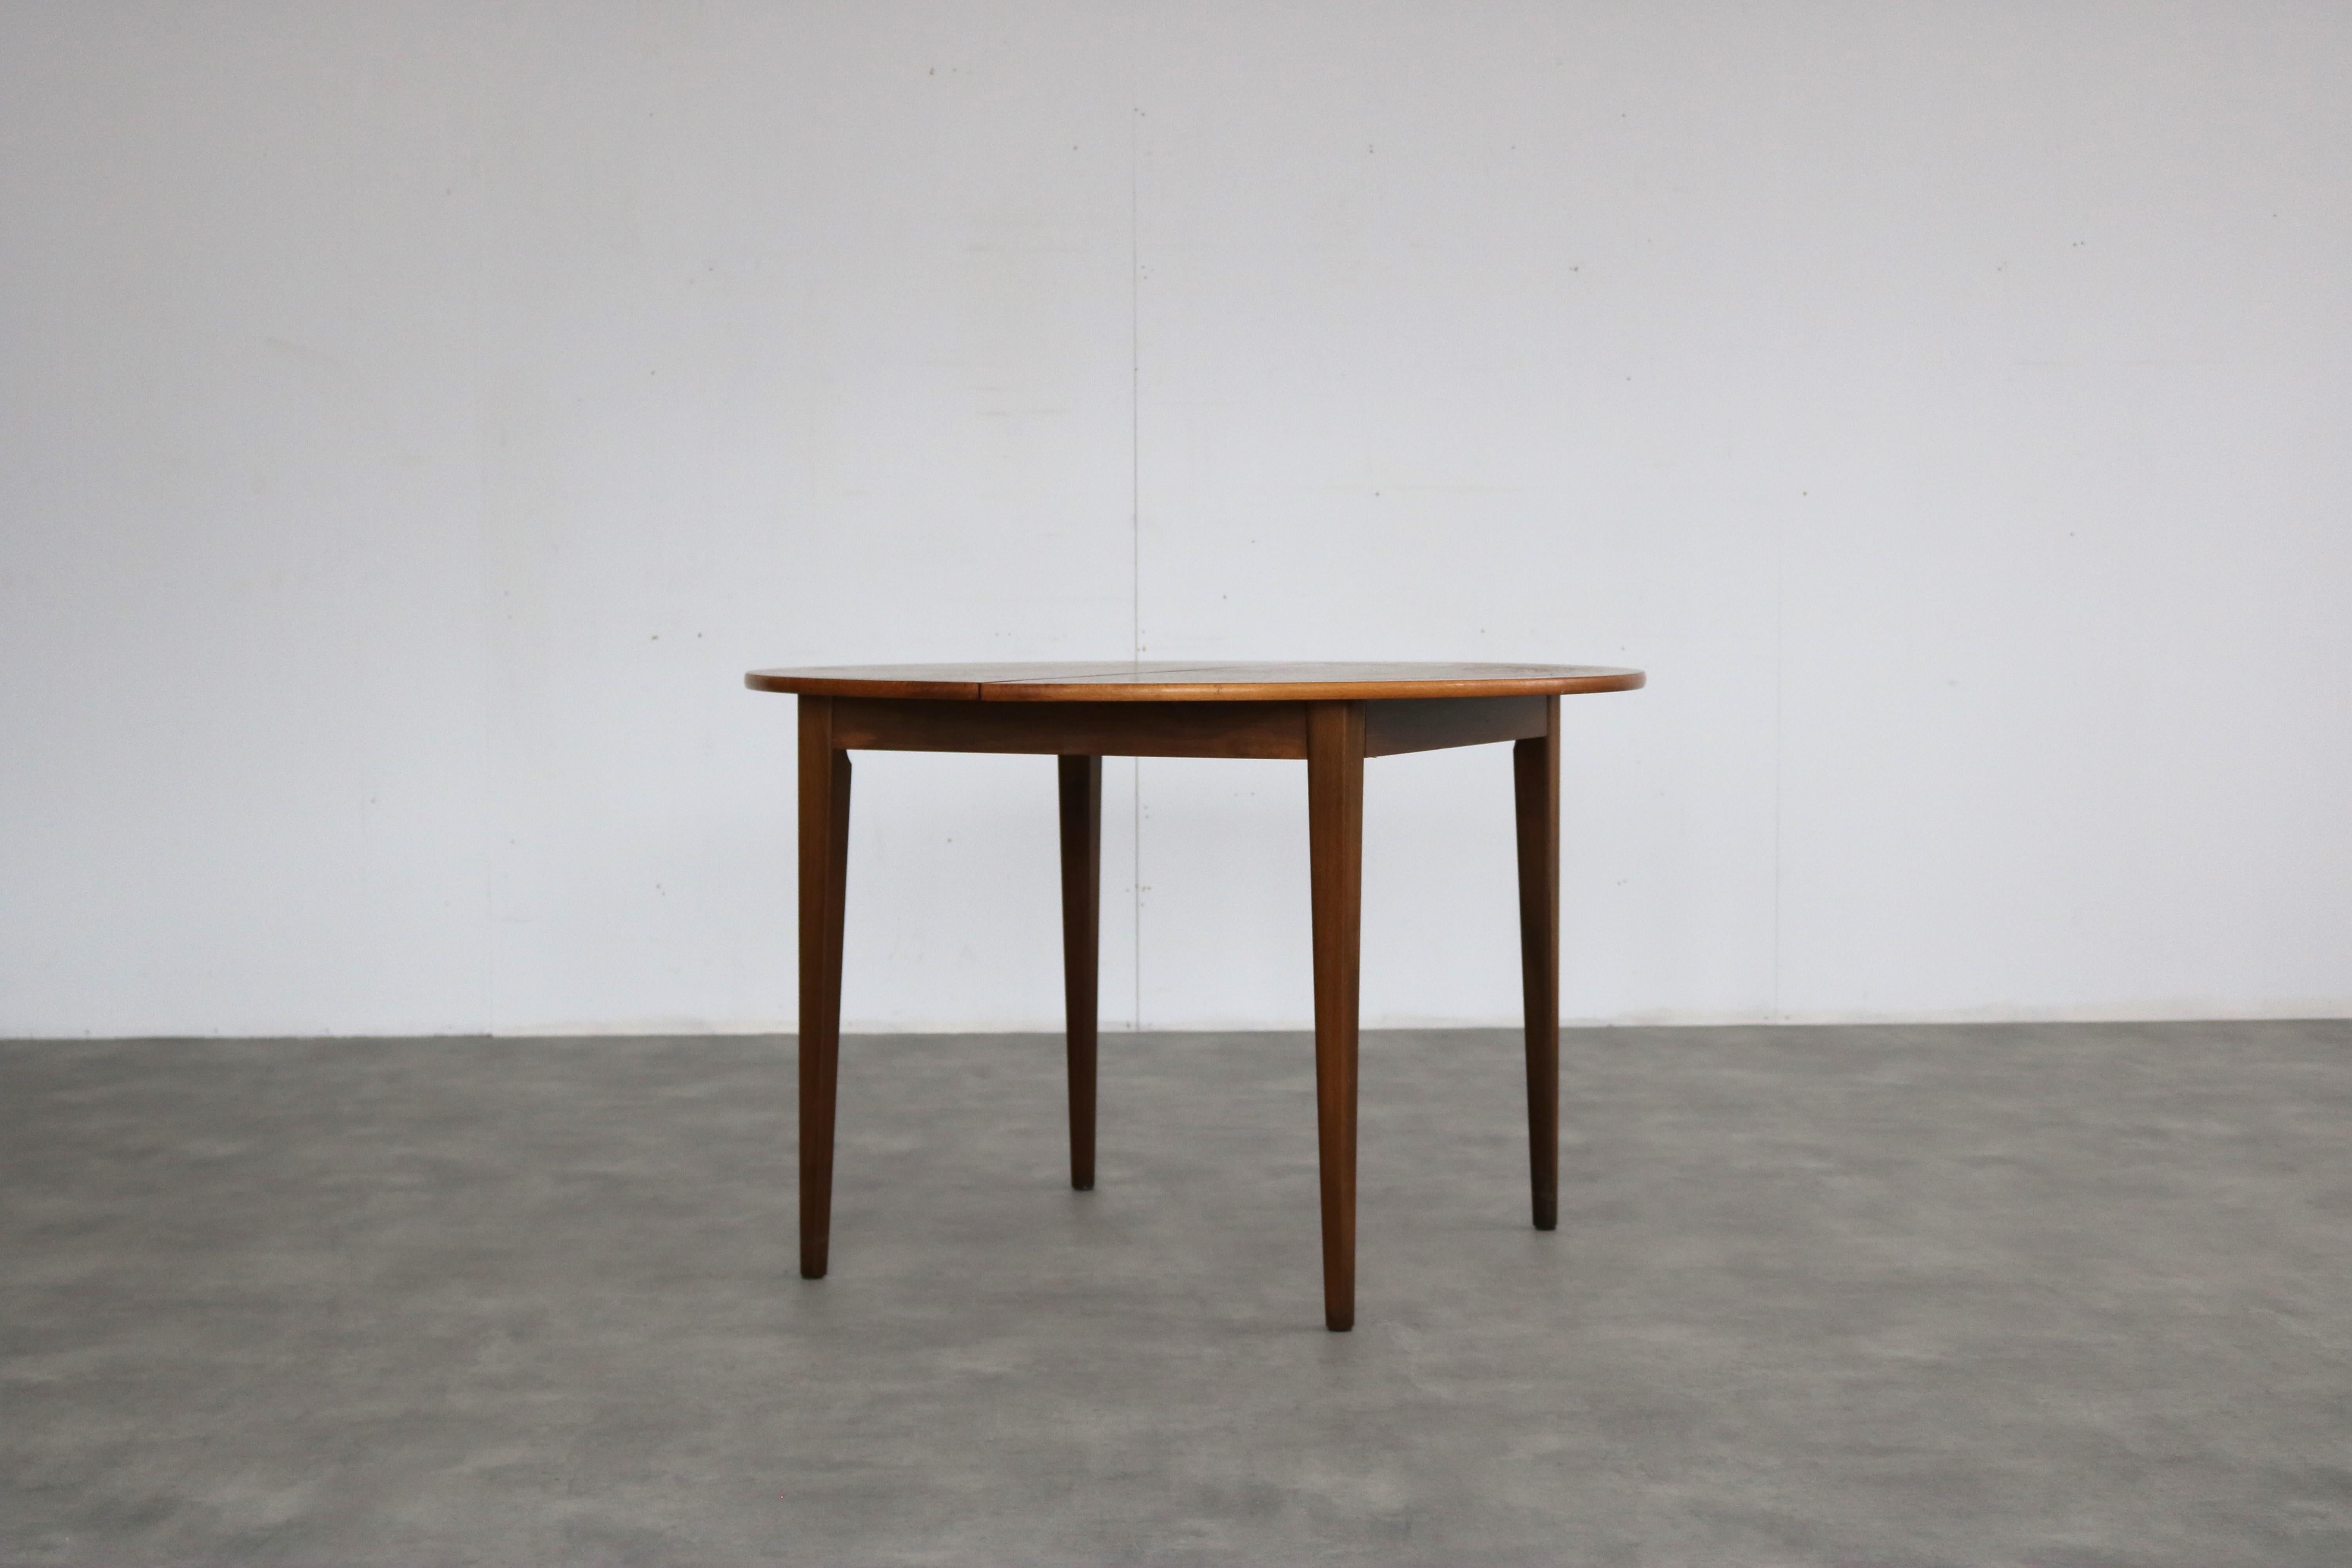 vintage dining table | table | teak | 60s | Sweden

period | 60's
design | unknown | Sweden
condition | good | light signs of use
size | 73 x 110 x 110 (hxwxd)

details | teak;

article number | 2246